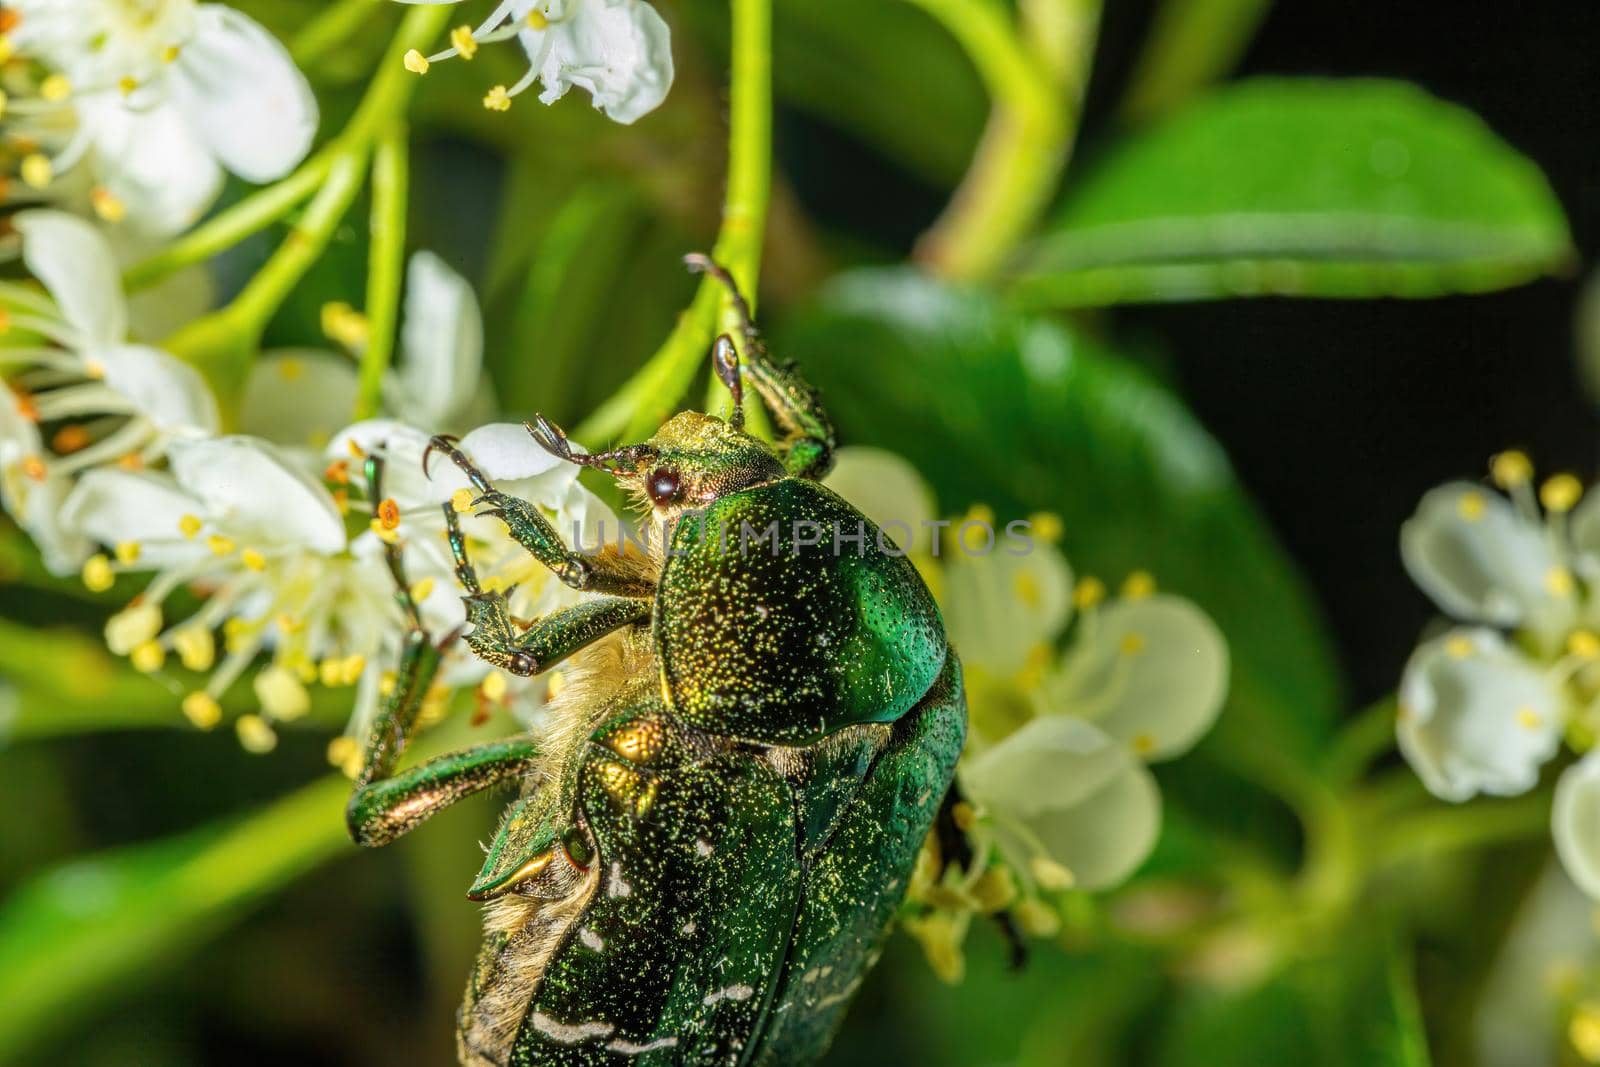 Big green bug collect pollen on a white flower in garden by clusterx